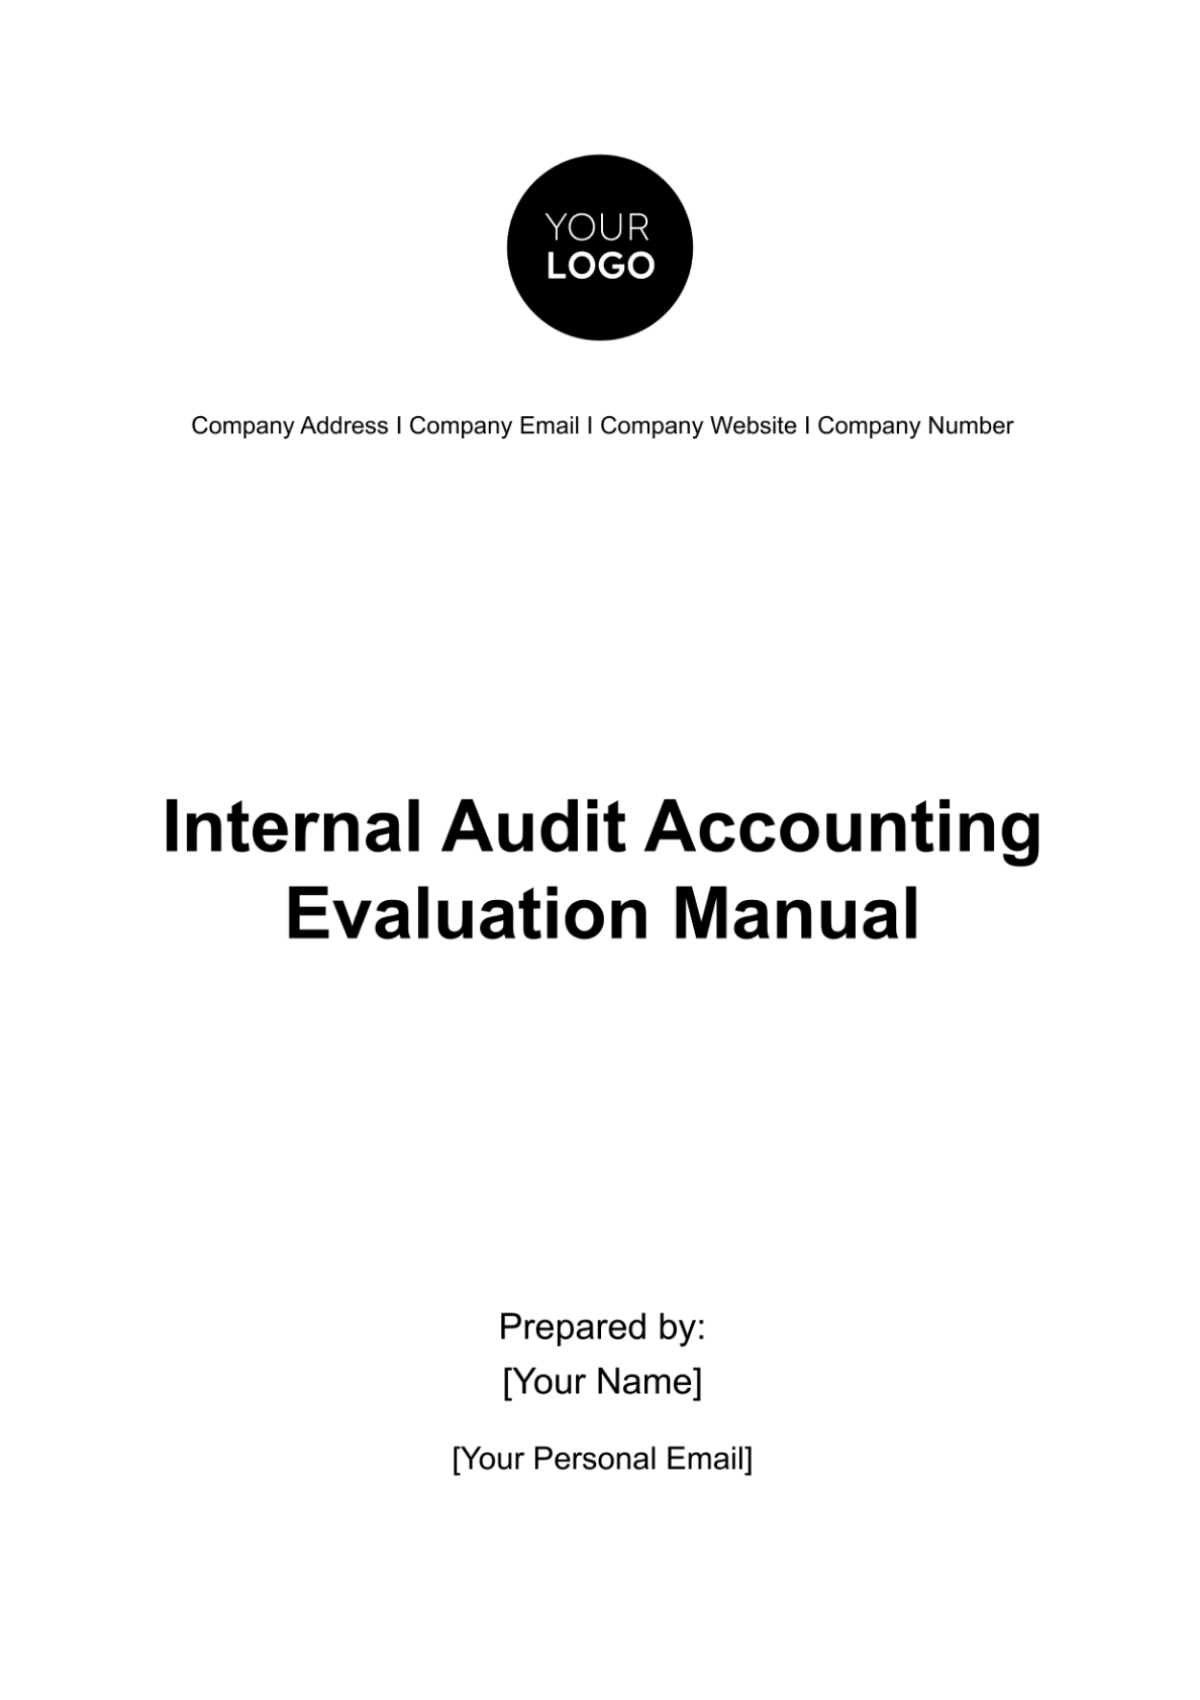 Internal Audit Accounting Evaluation Manual Template